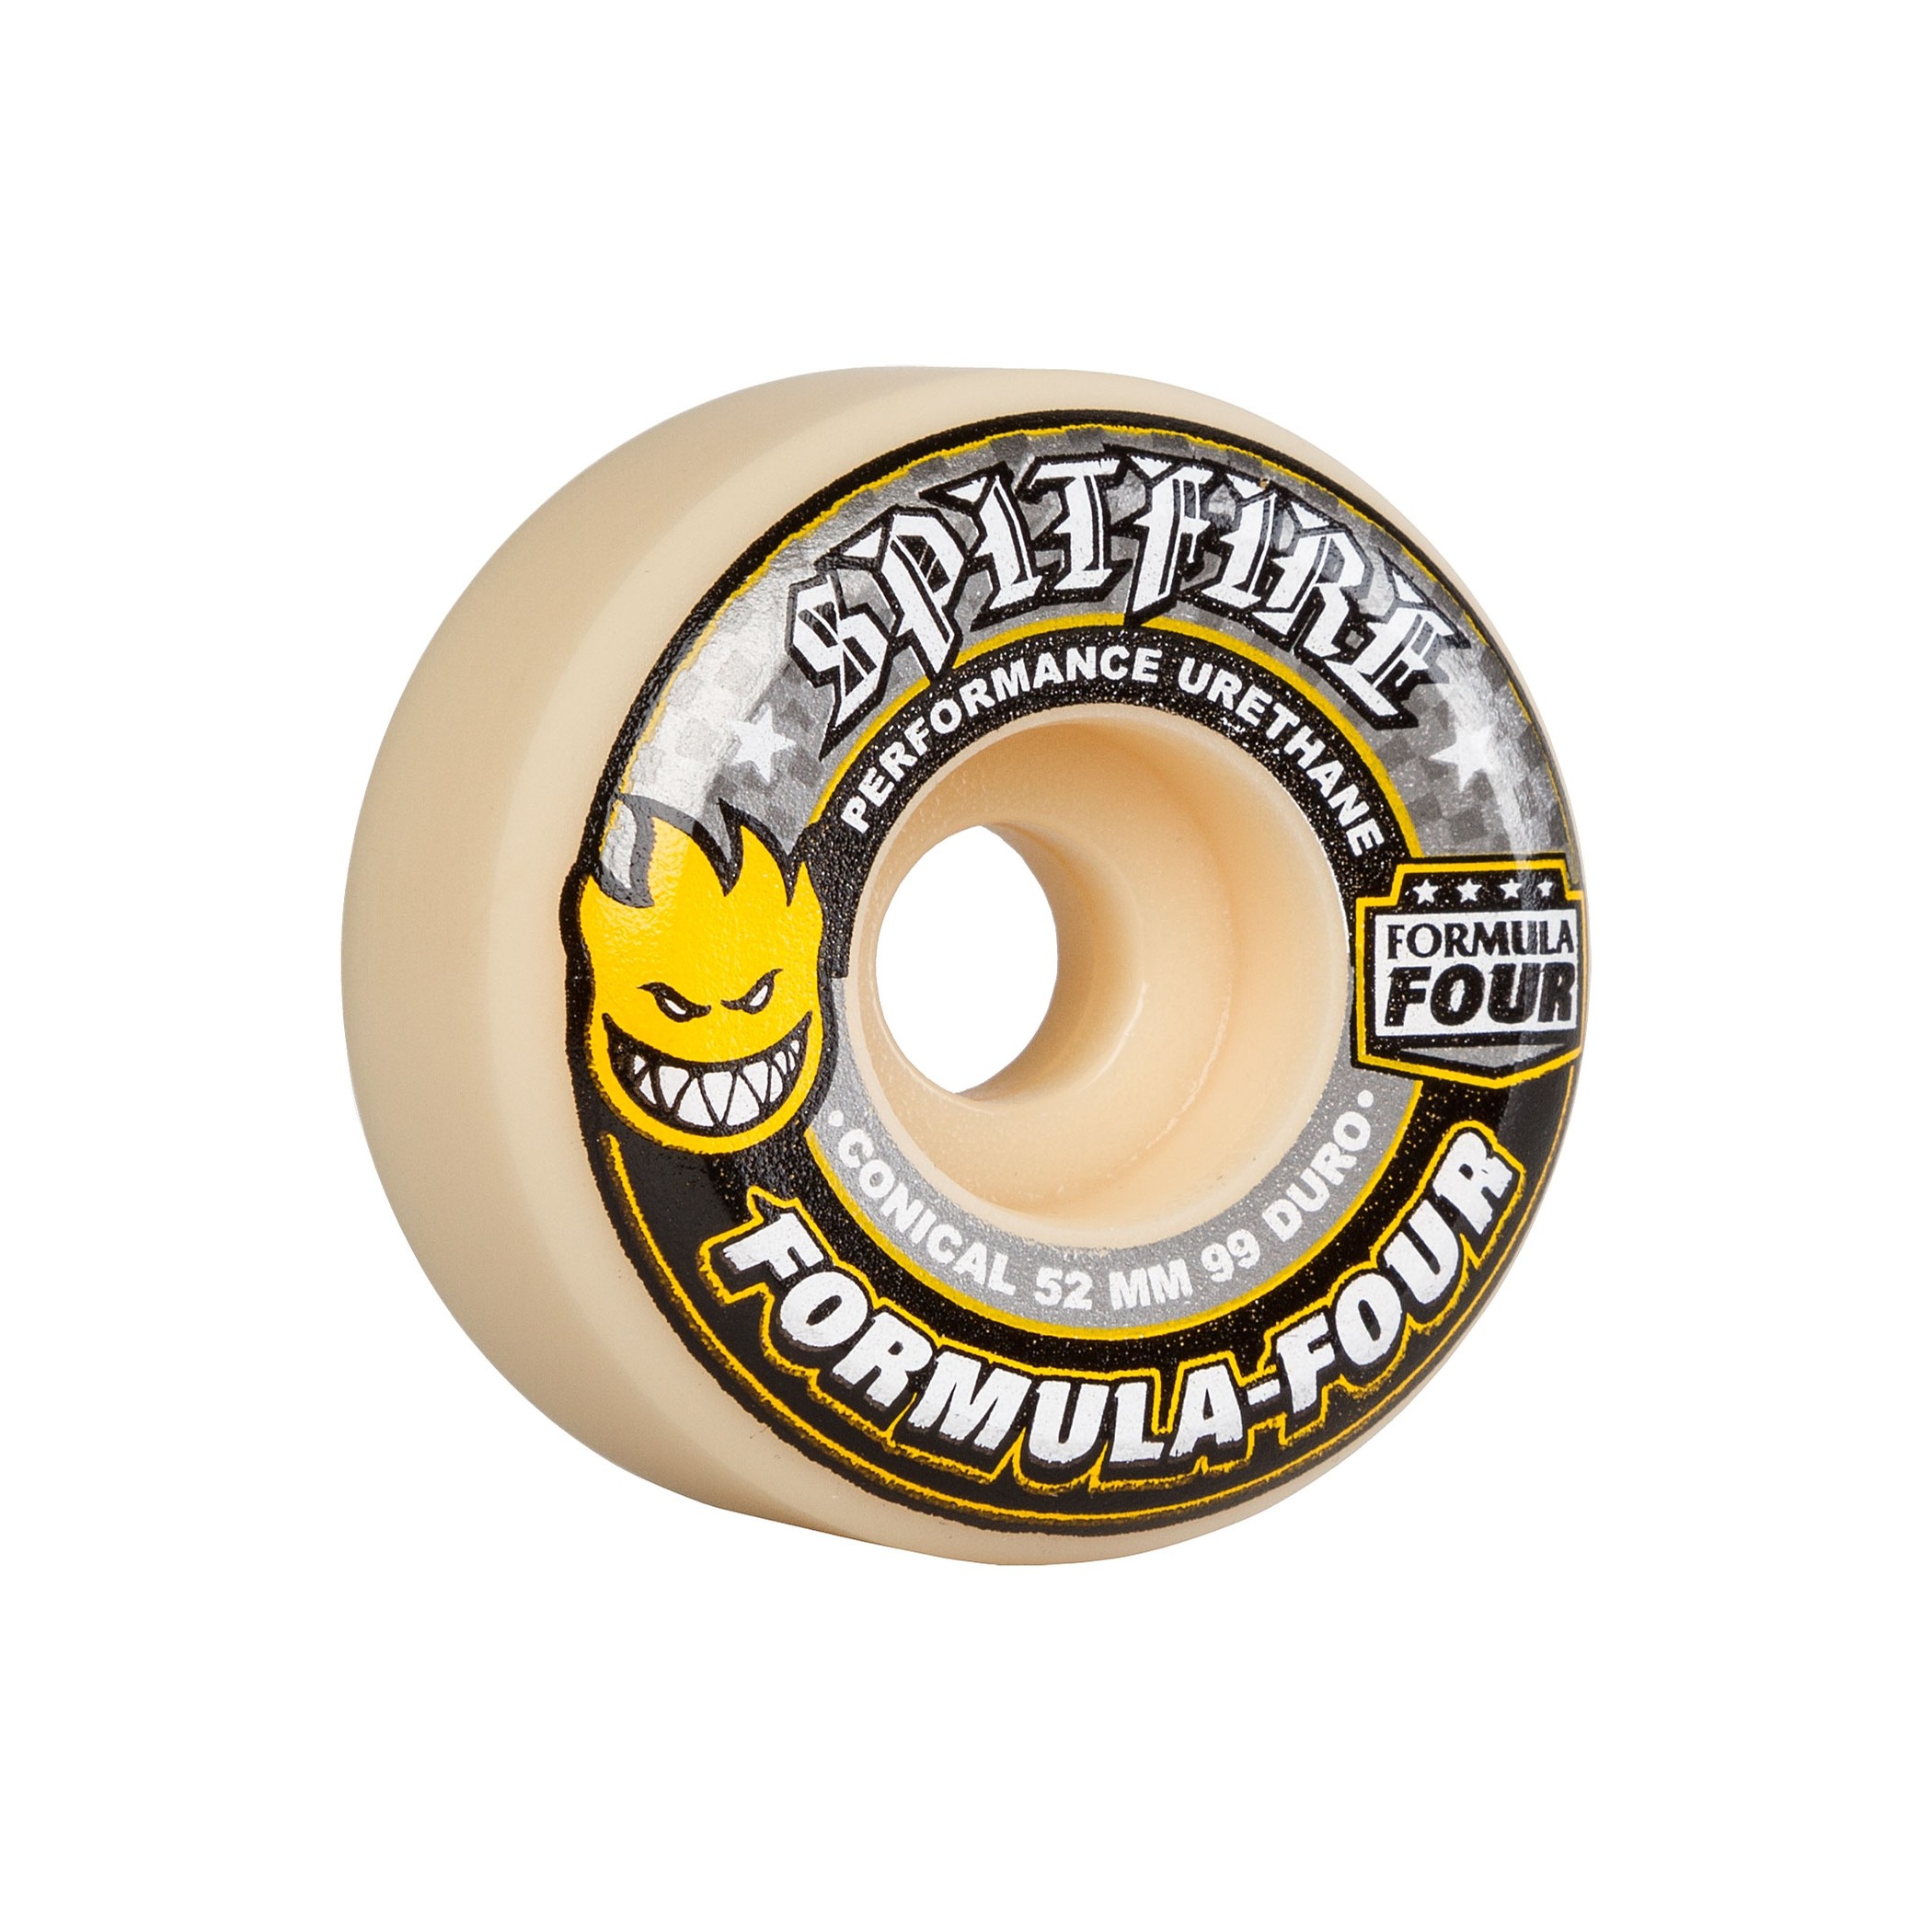 Spitfire Formula Four Conical 52mm 99a Wheels at Cal Surf